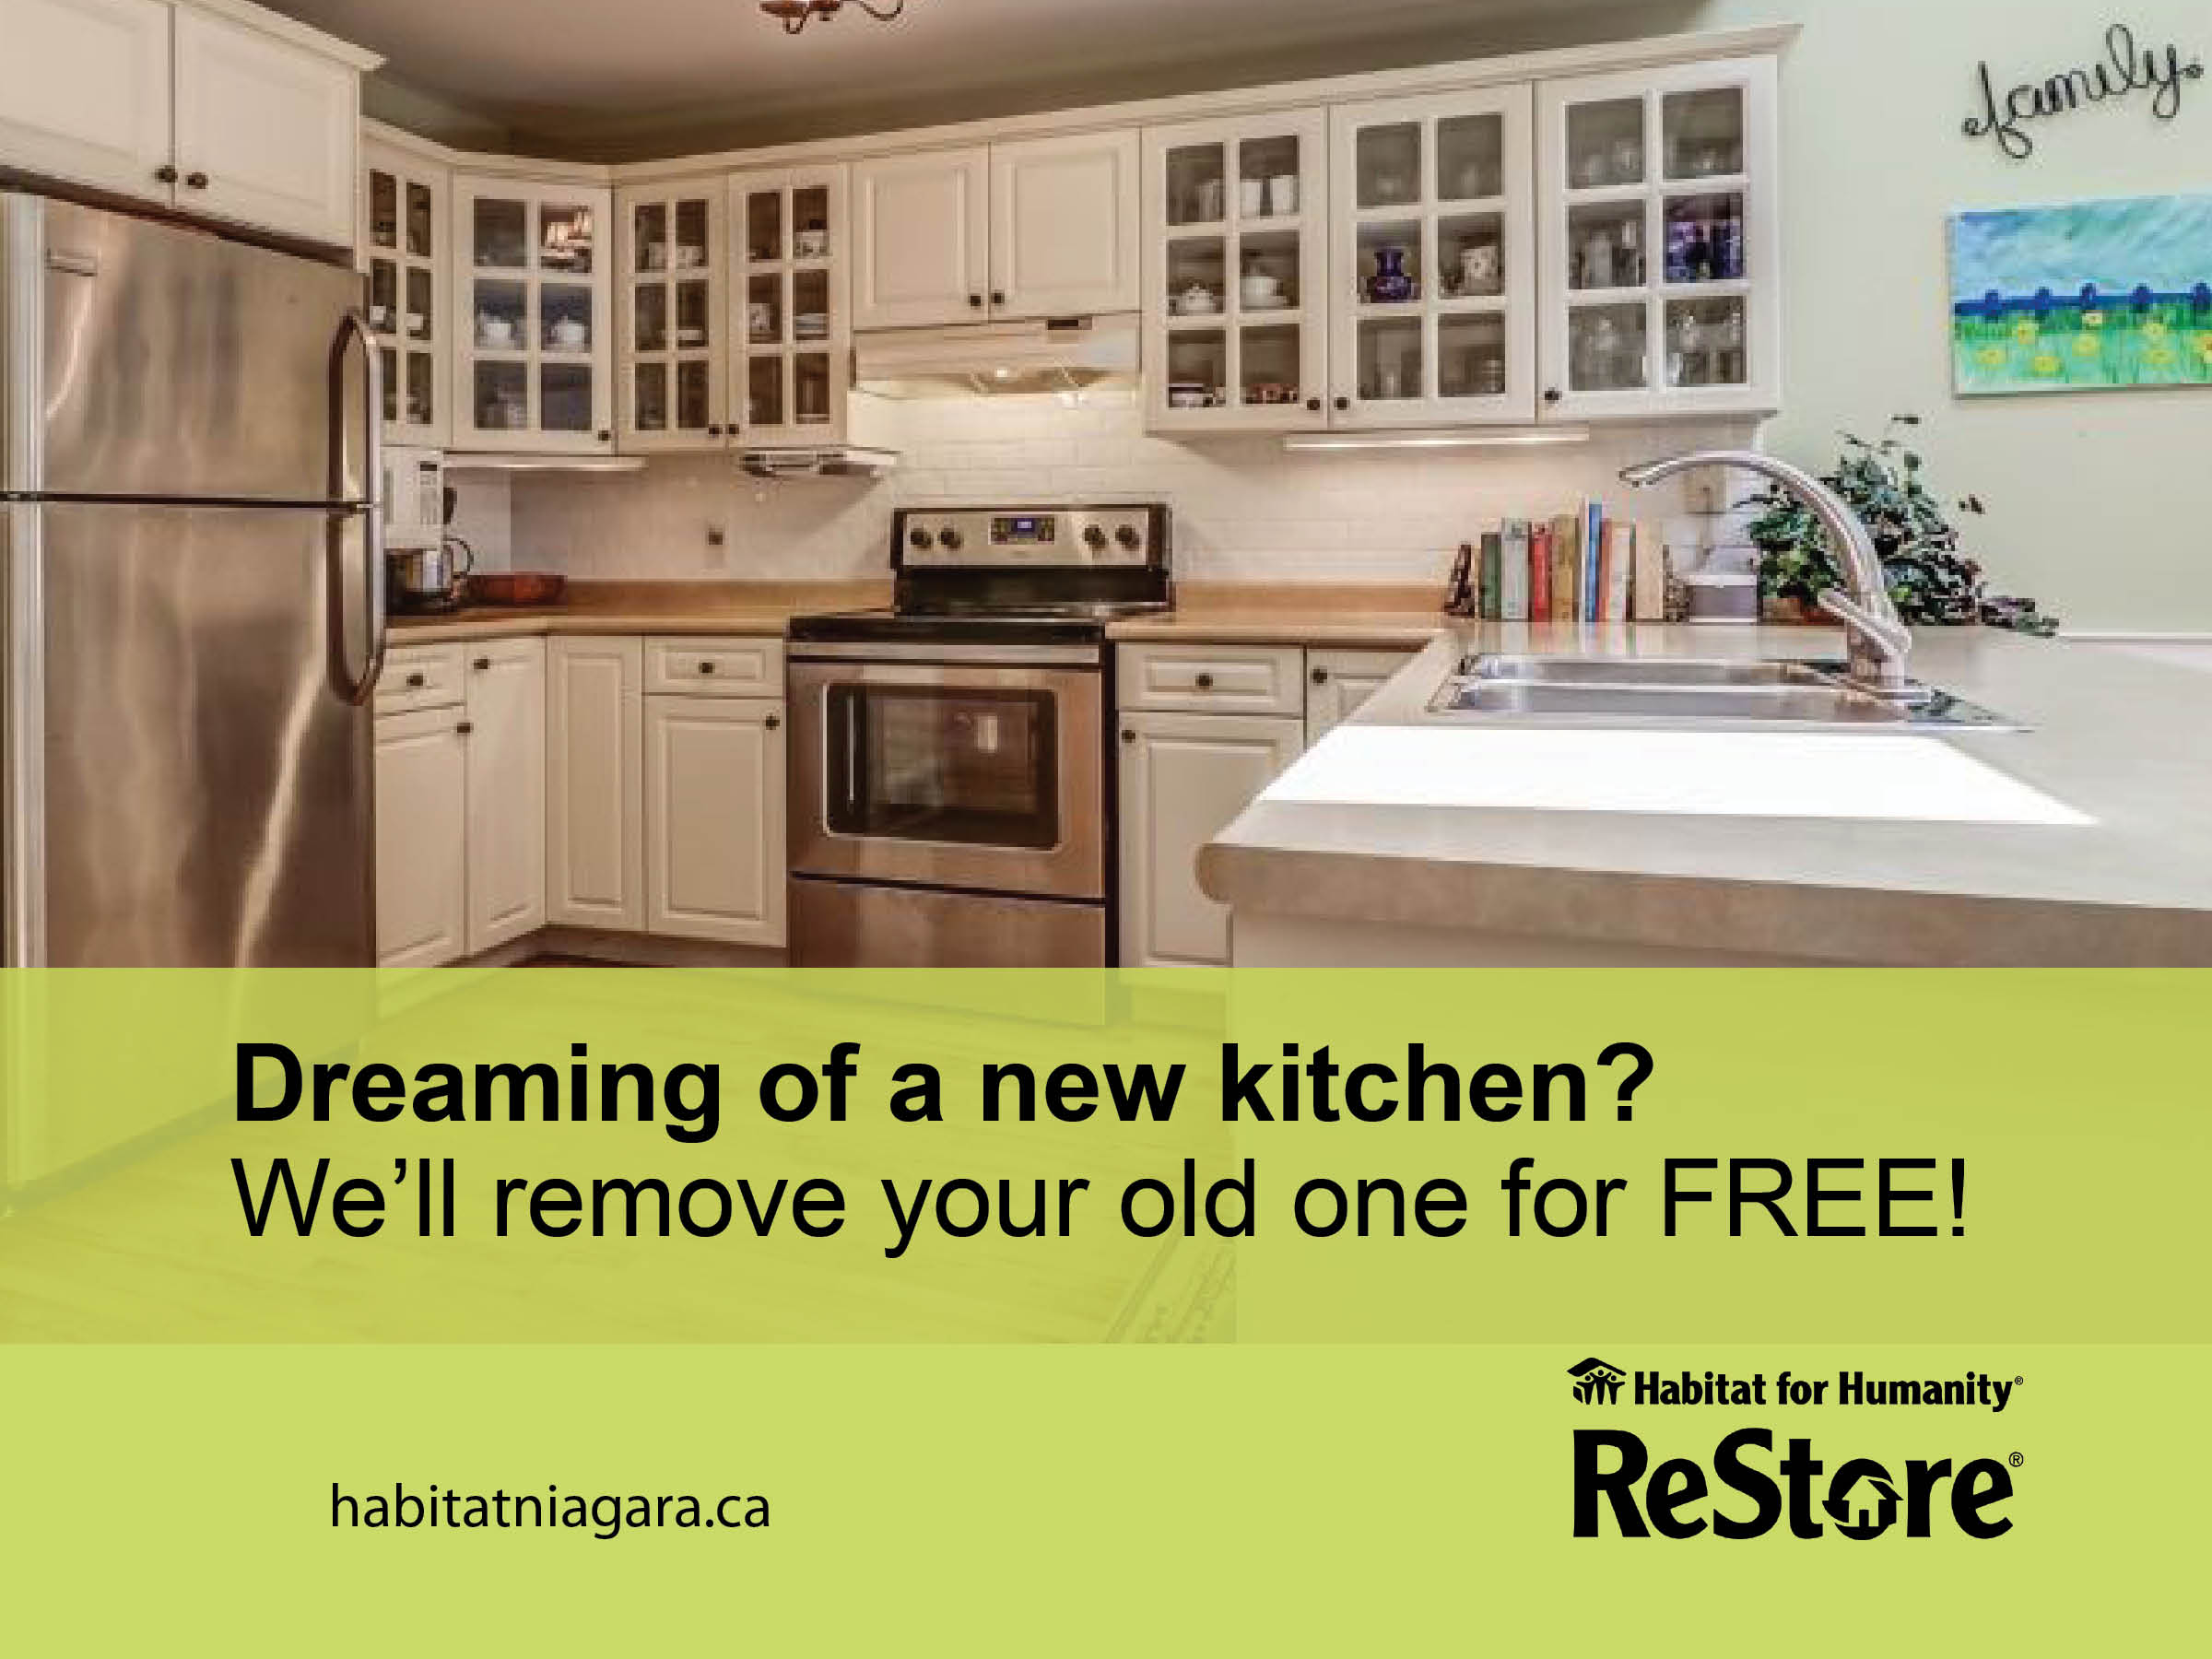 Getting ready for a kitchen renovation?